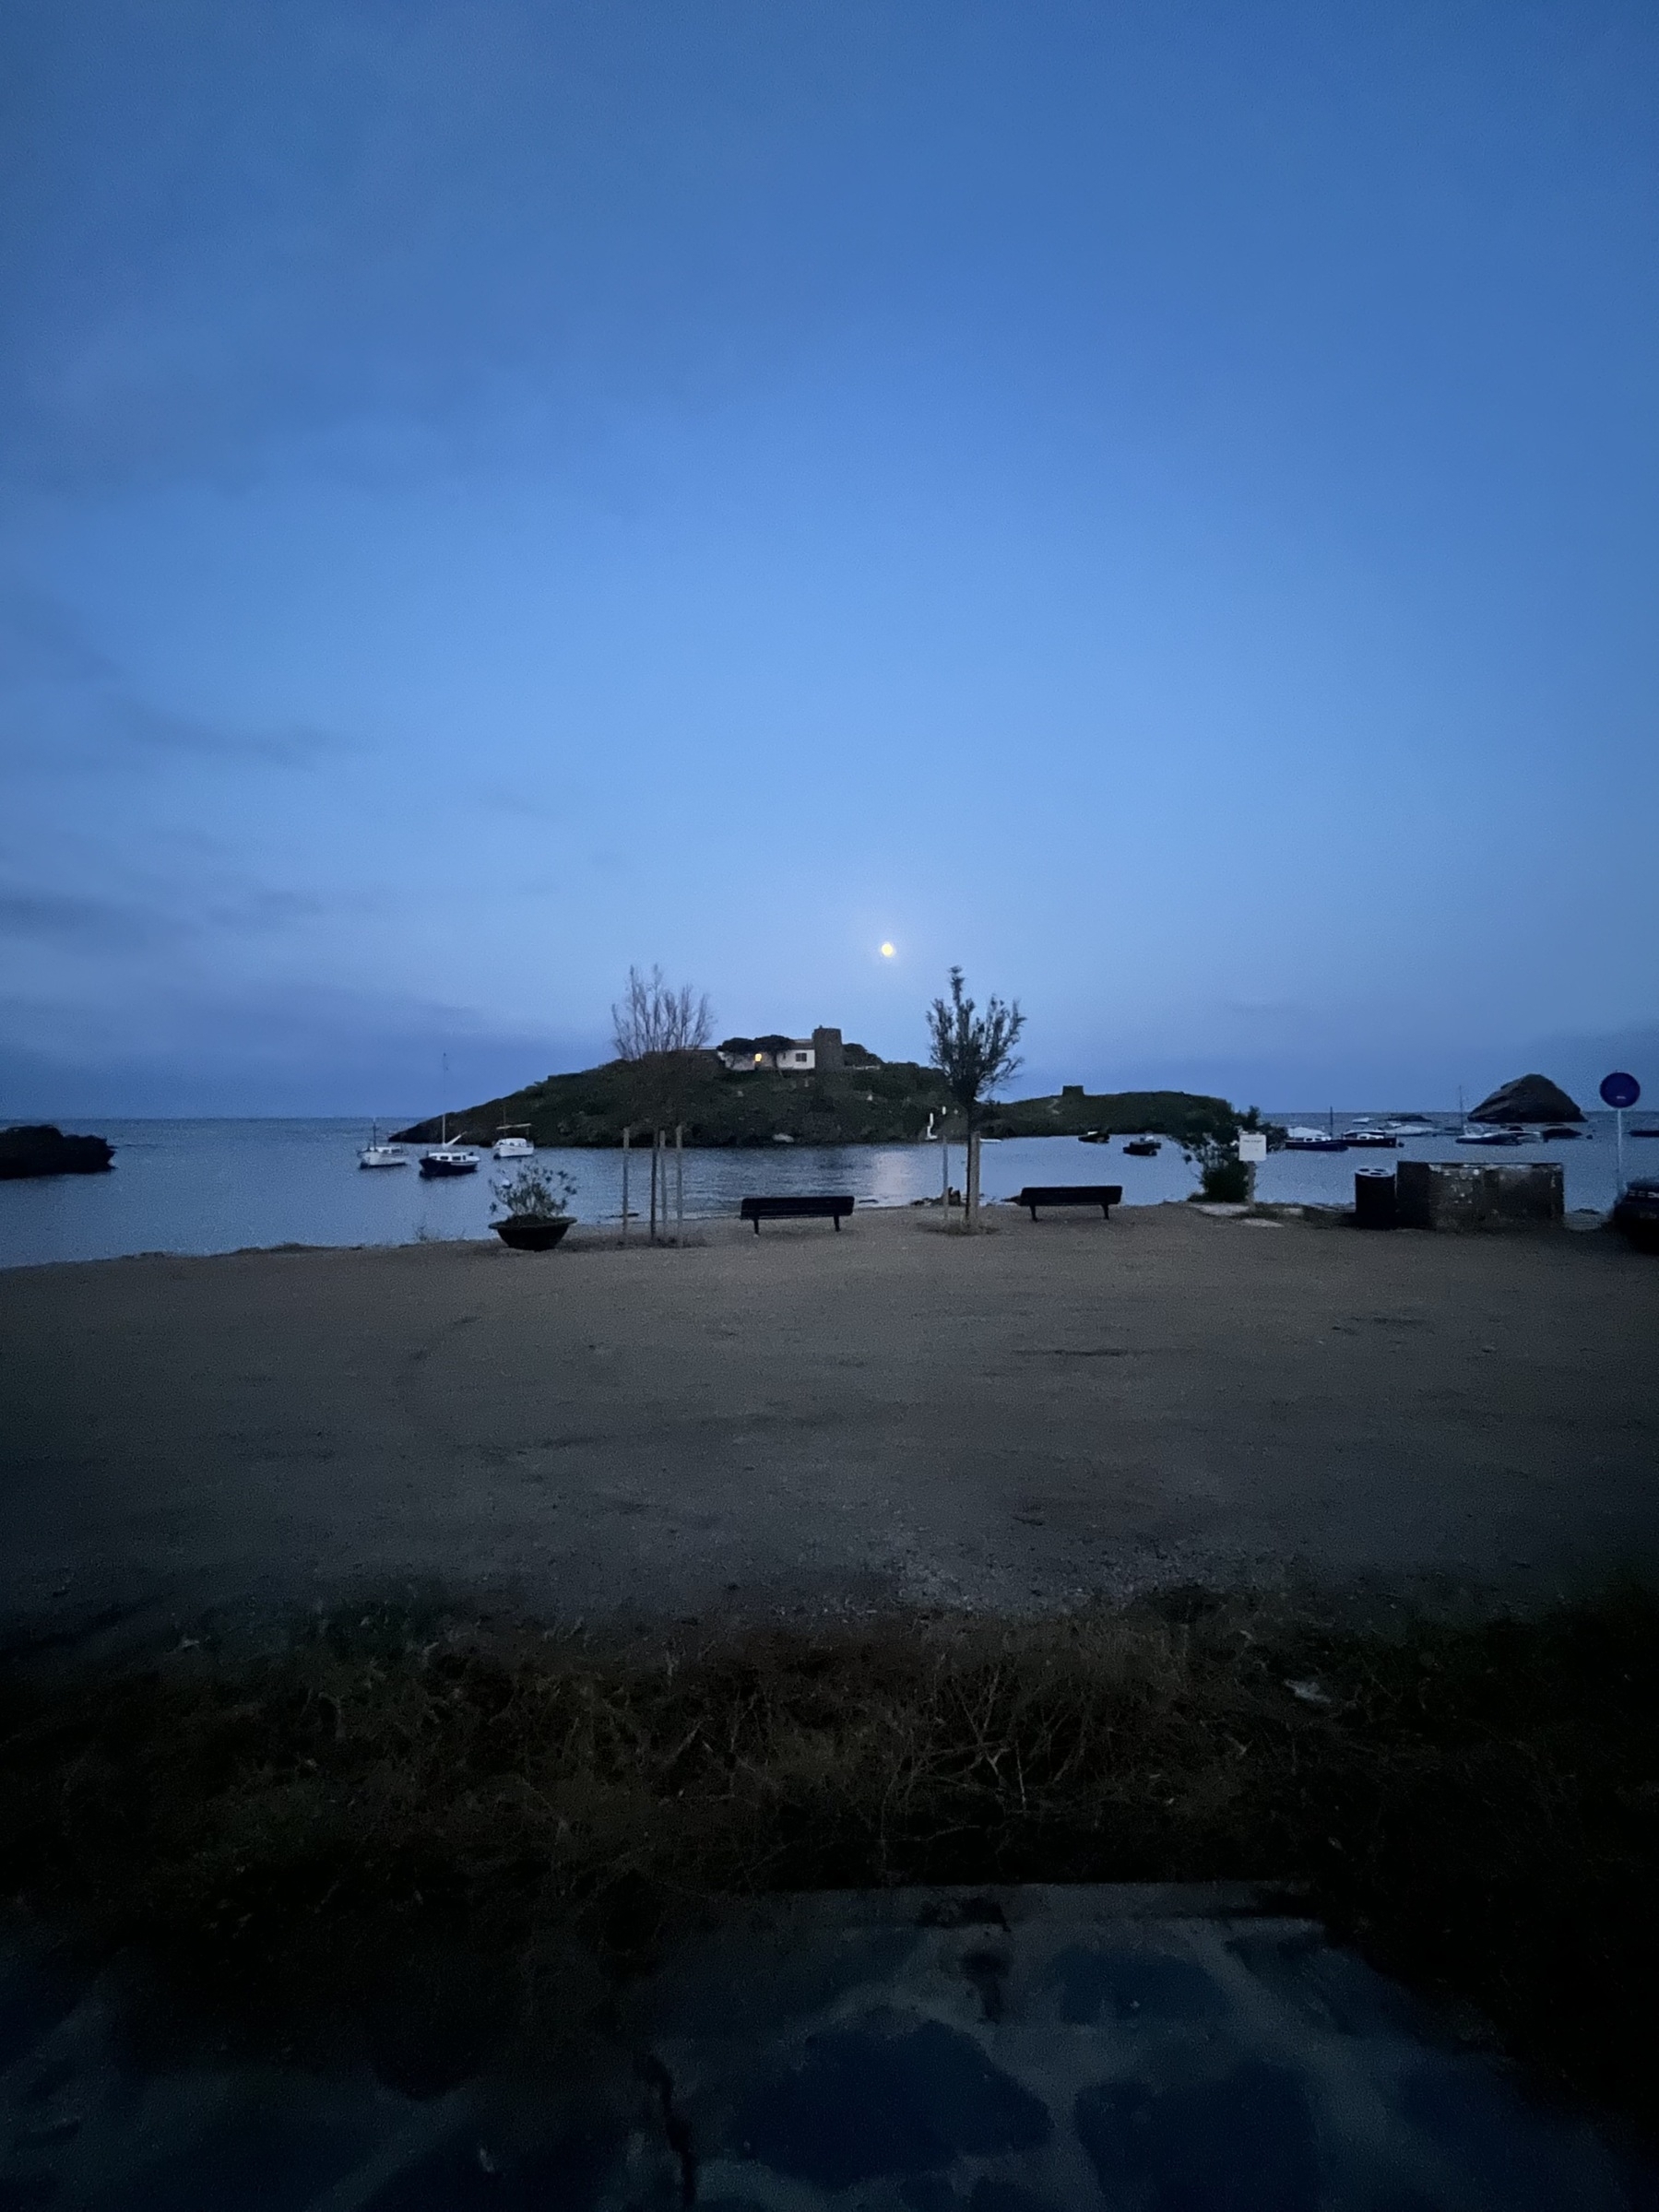 A neat full moon rising over a small island with a building on it that include a turret. Small craft boast dot in the calm water. In the foreground is a smooth dirt road with two trees and two chairs at the water’s edge.